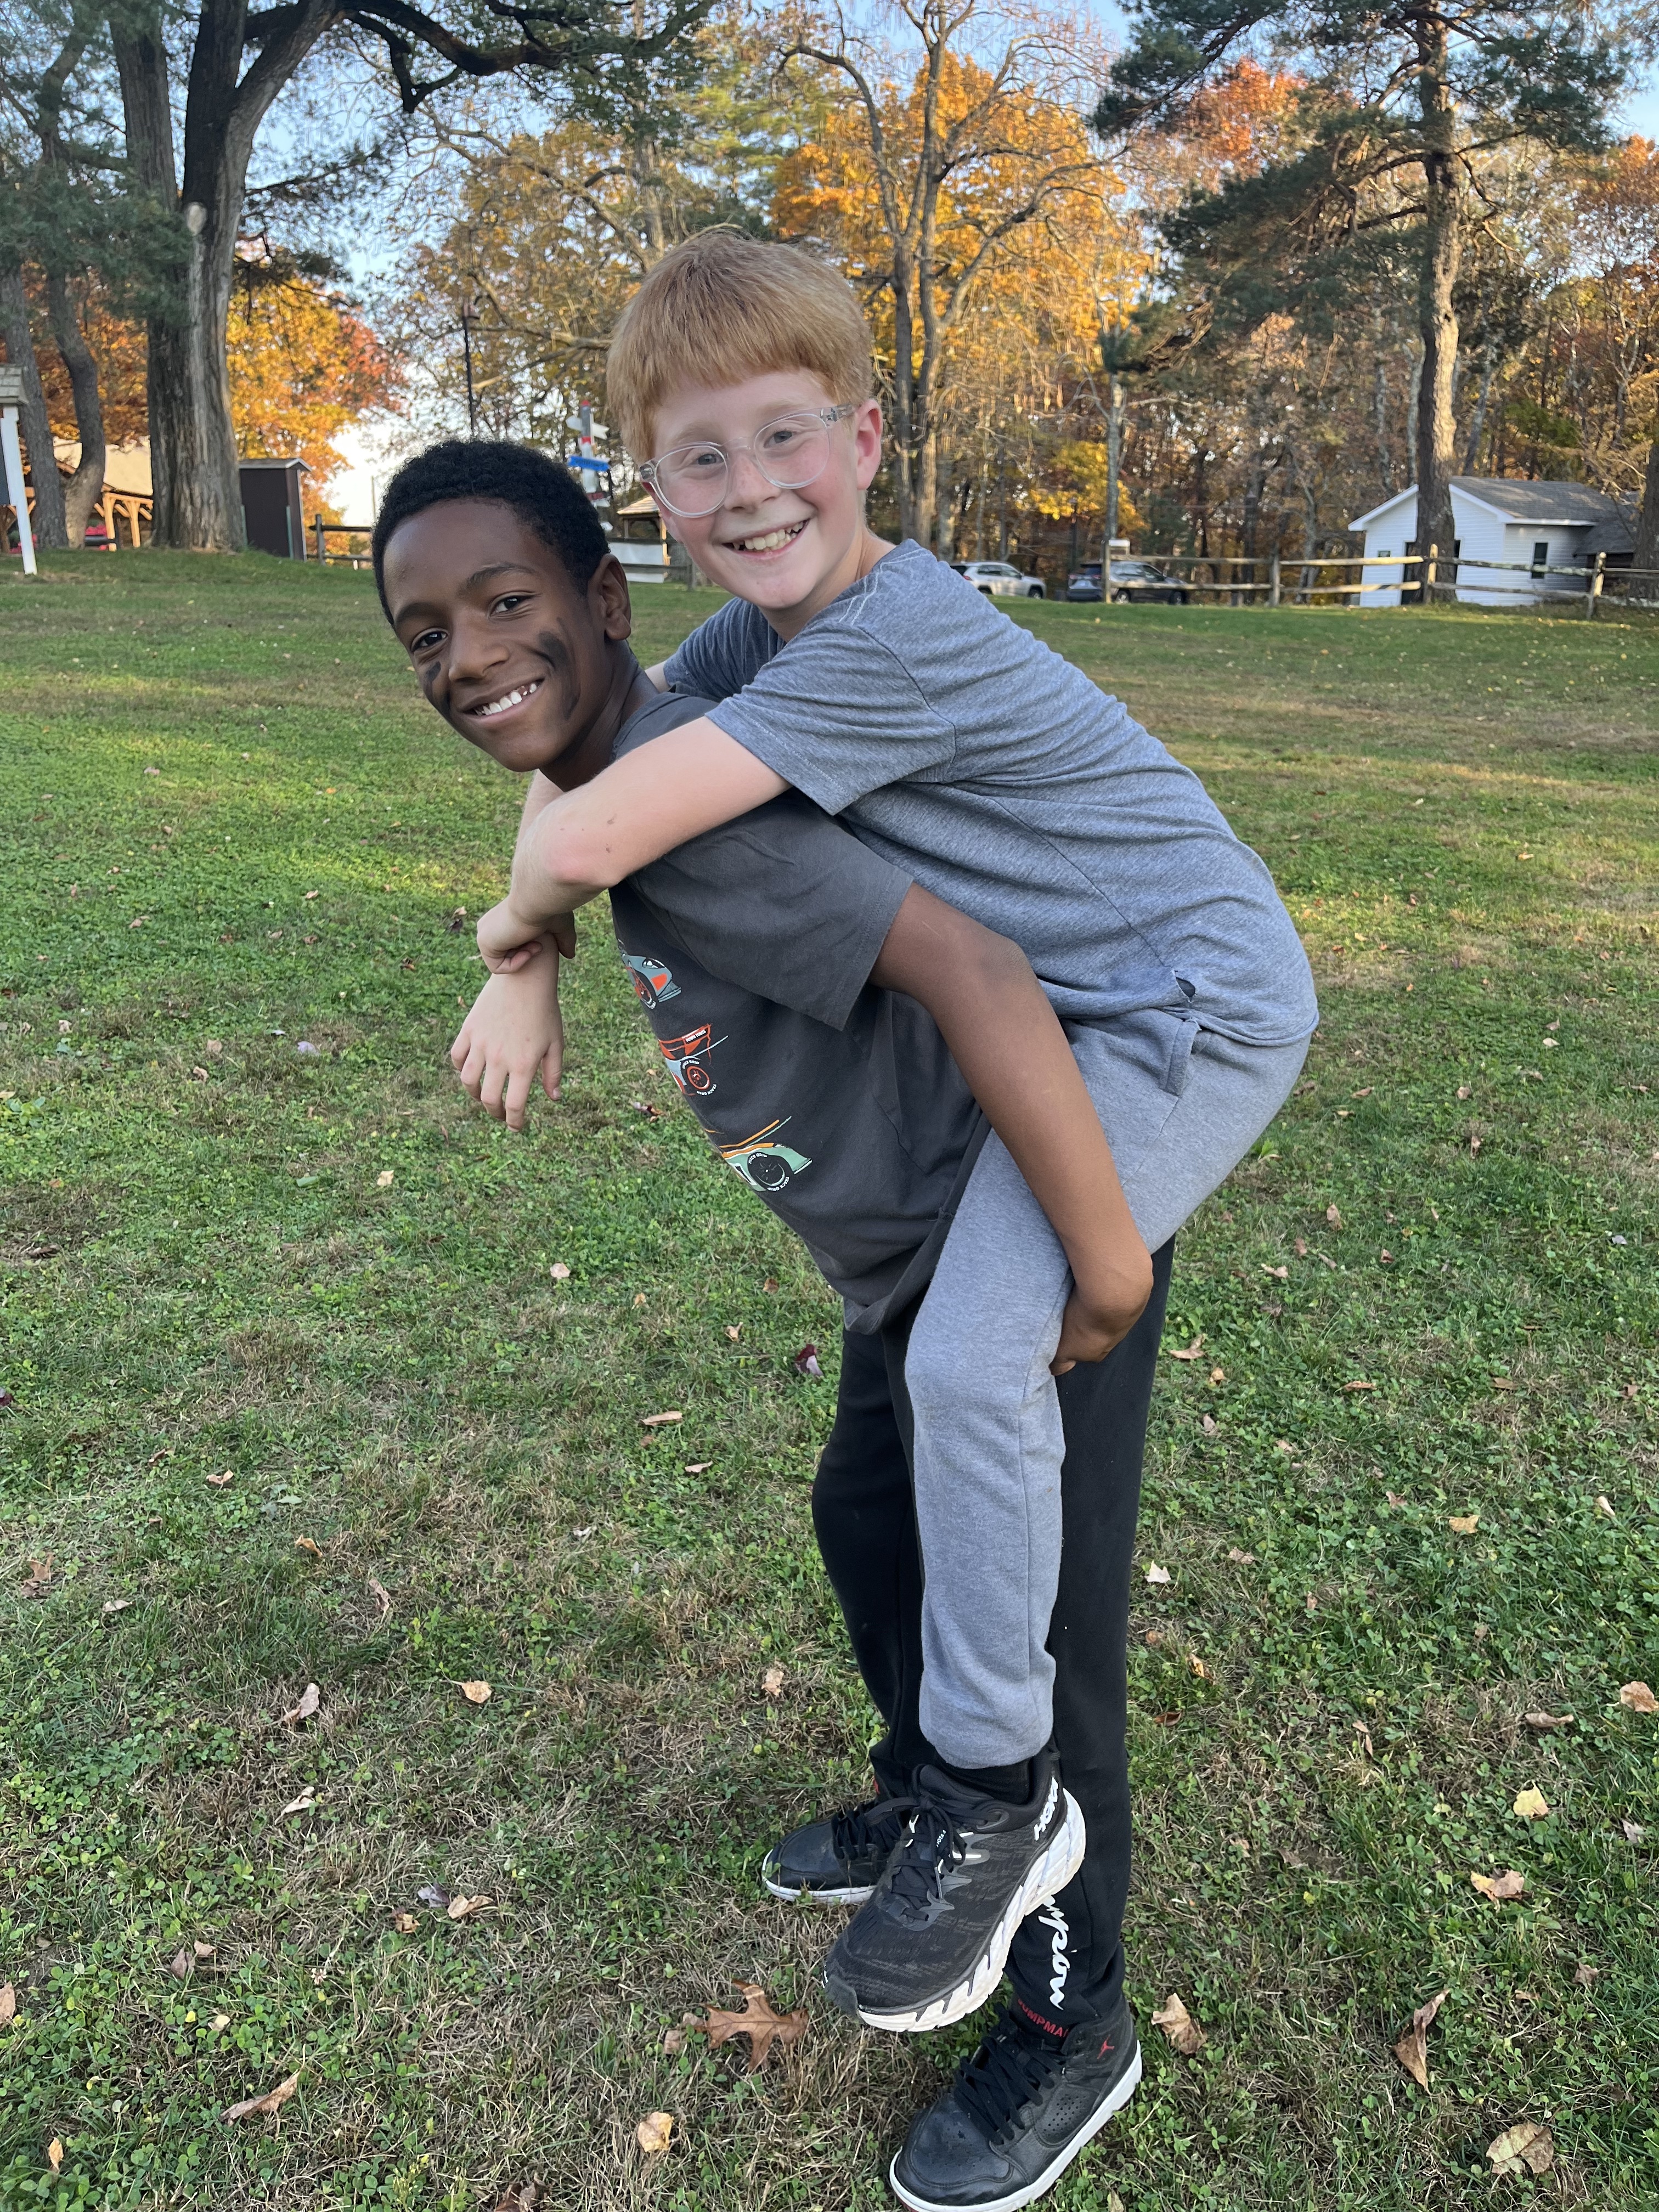 Students give each other piggy back rides outside.